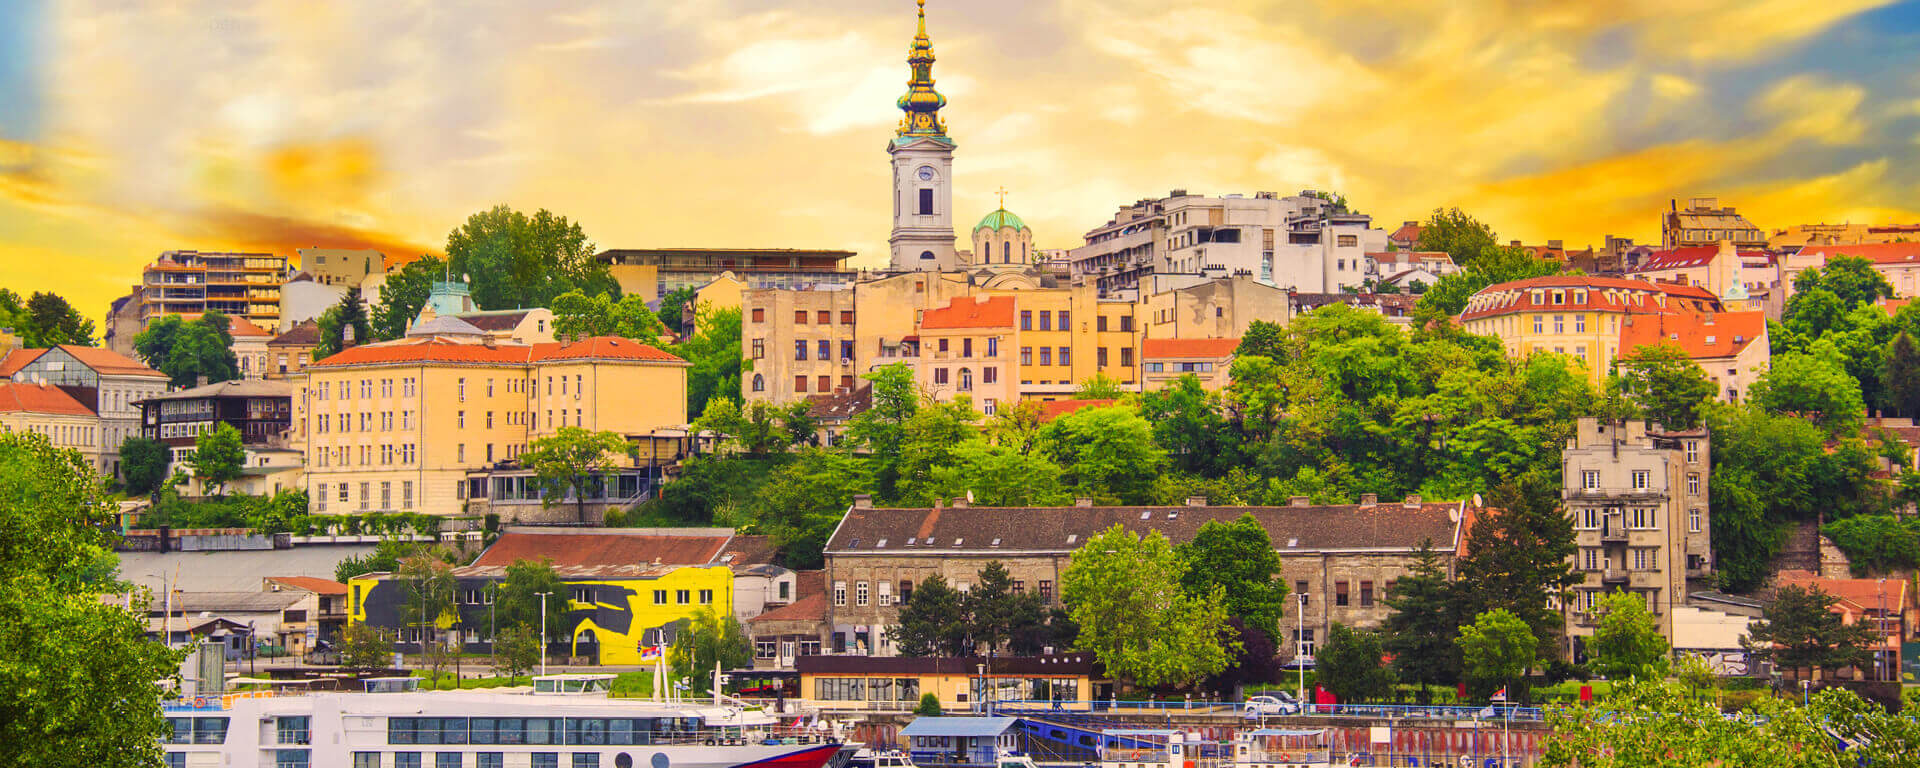 Belgrade – The party capital of Europe